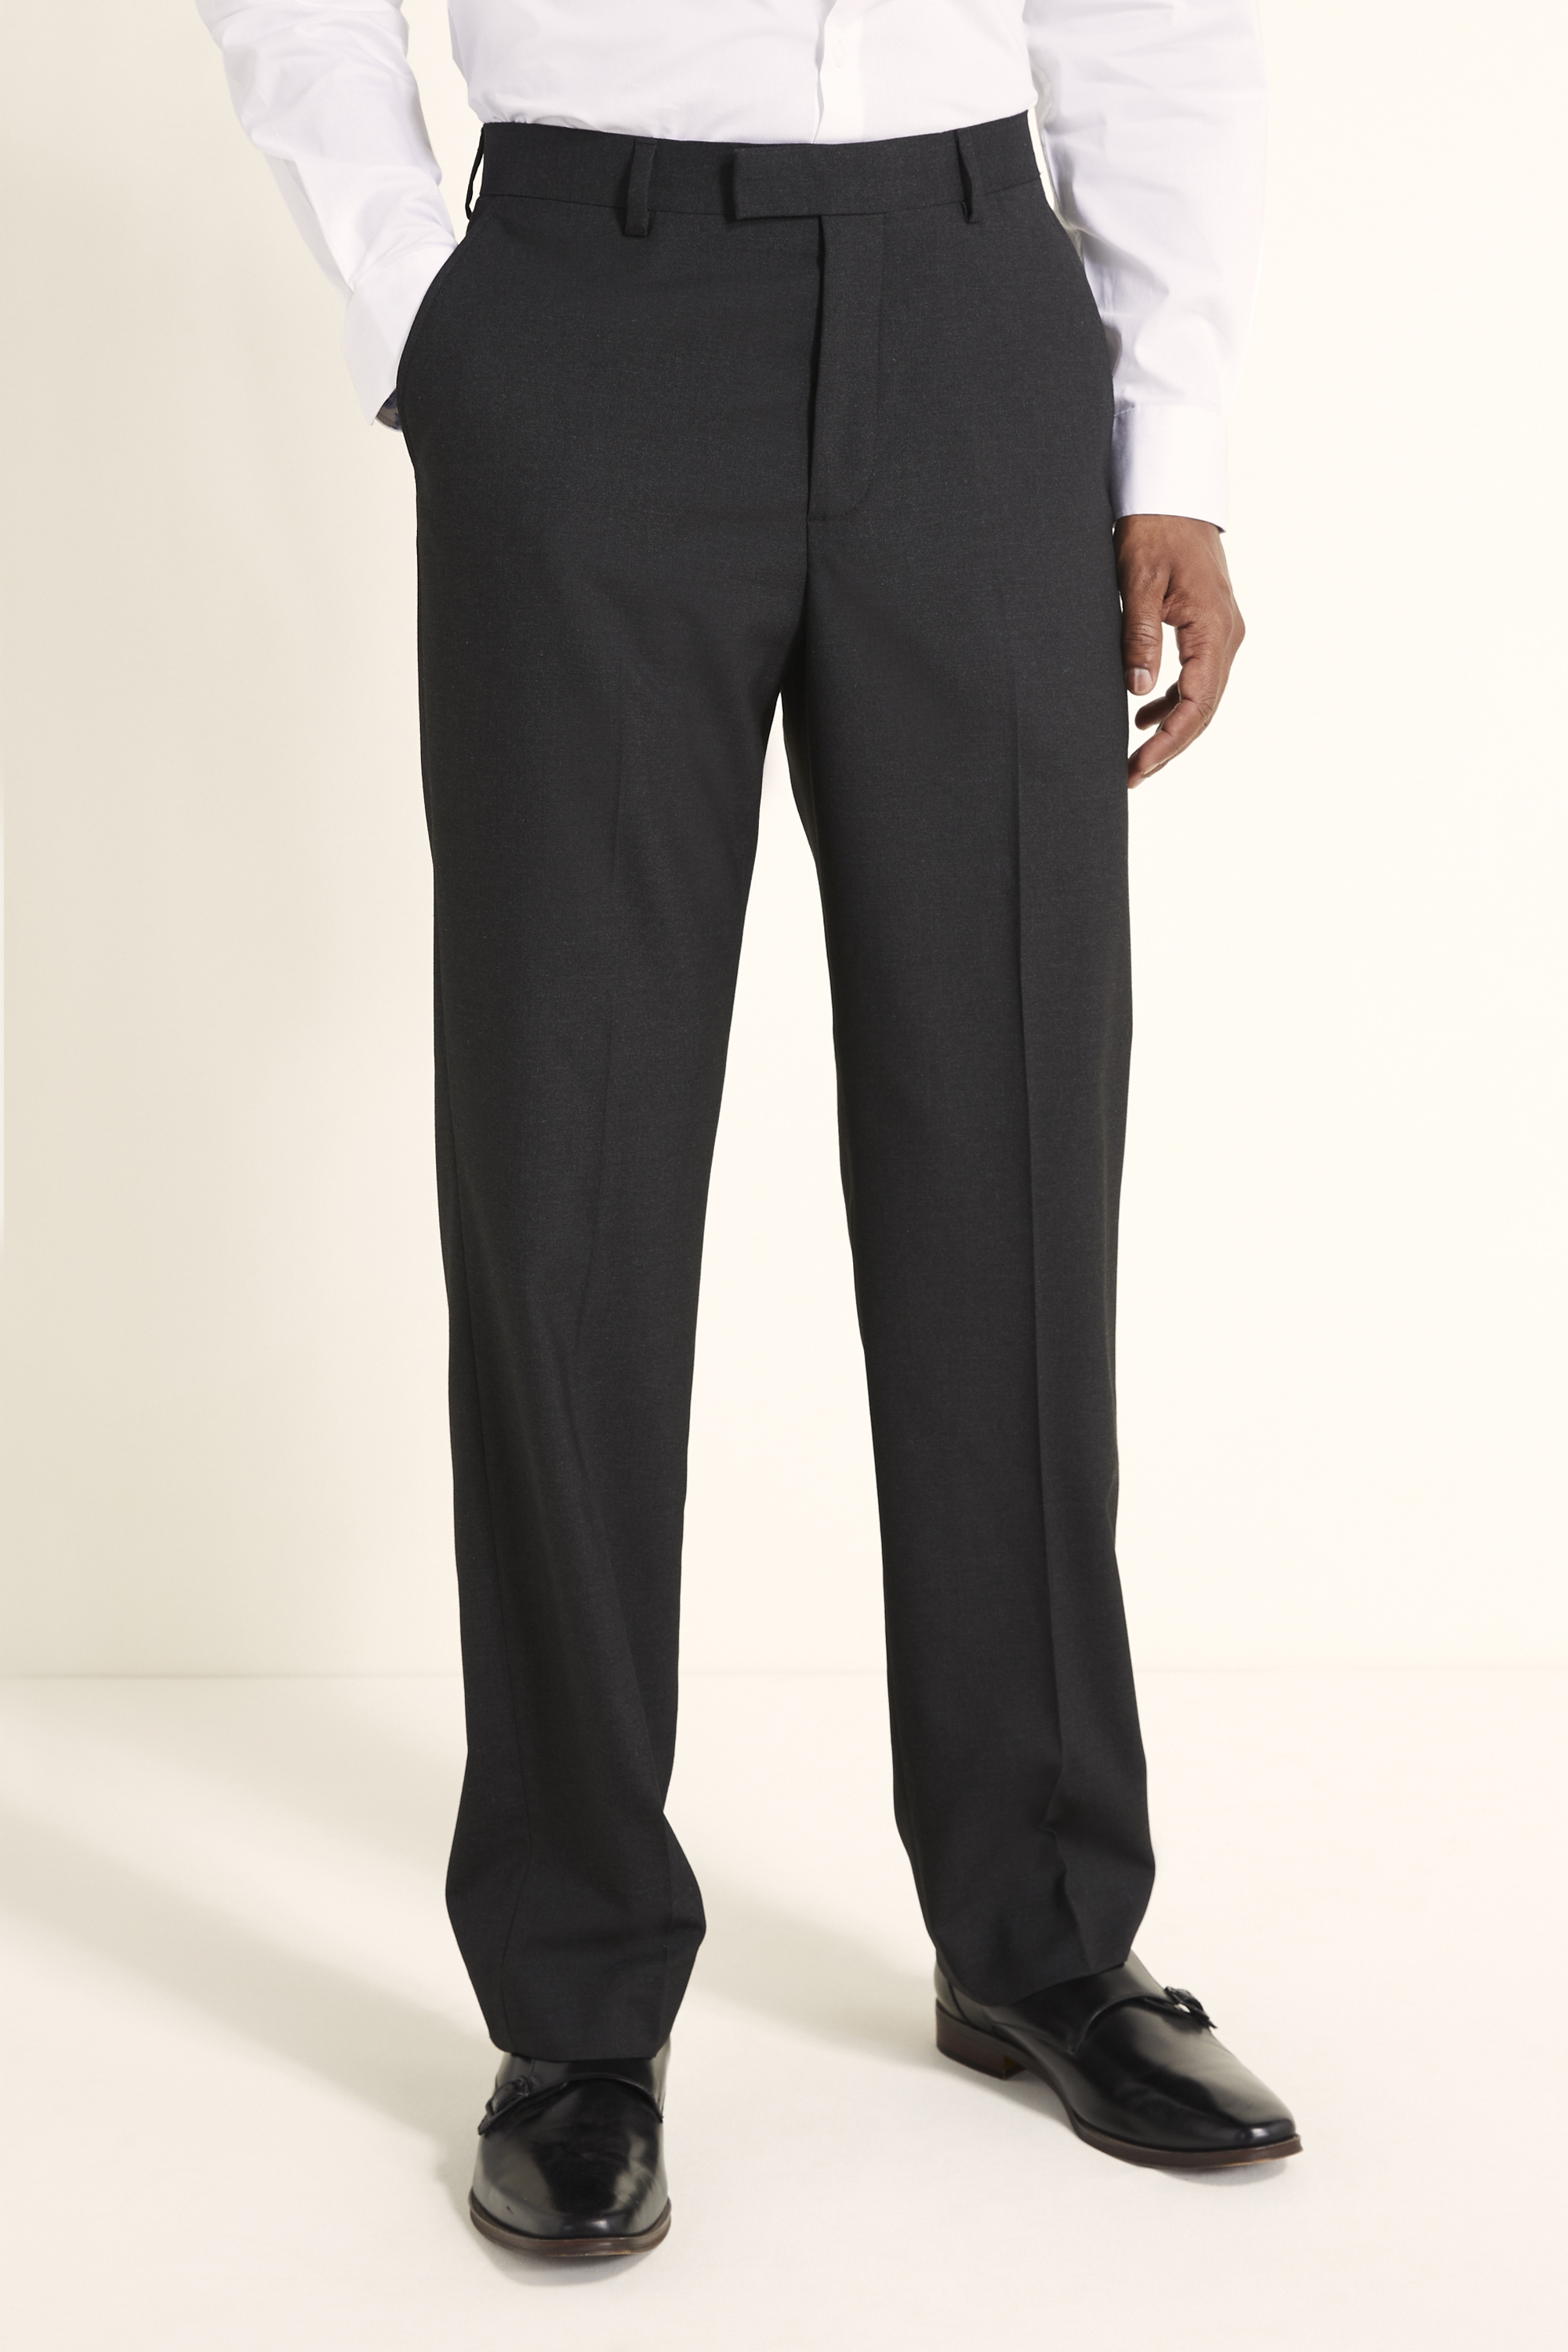 Regular Fit Charcoal Plain Trousers | Buy Online at Moss